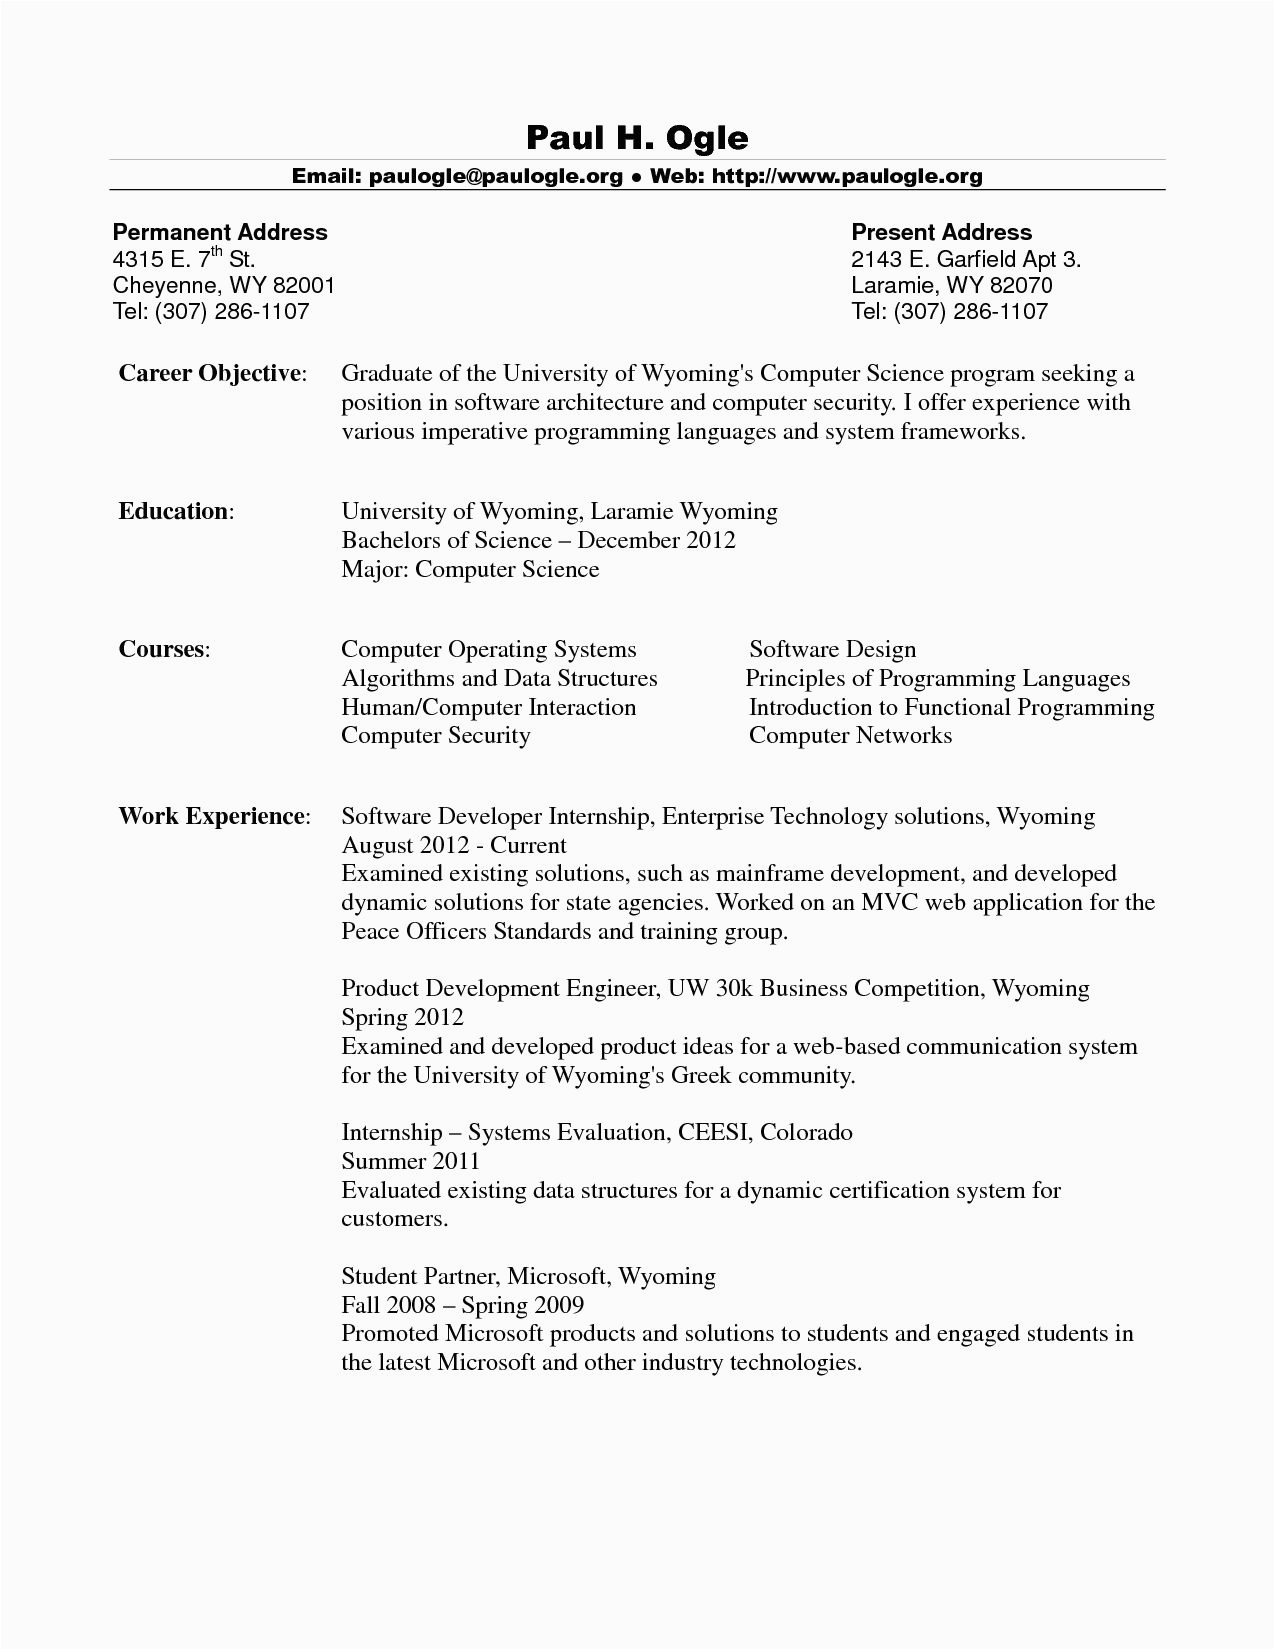 Sample Resume for Ms In Computer Science In Usa Resume Ms In Puter Science Resume Ms In Puter